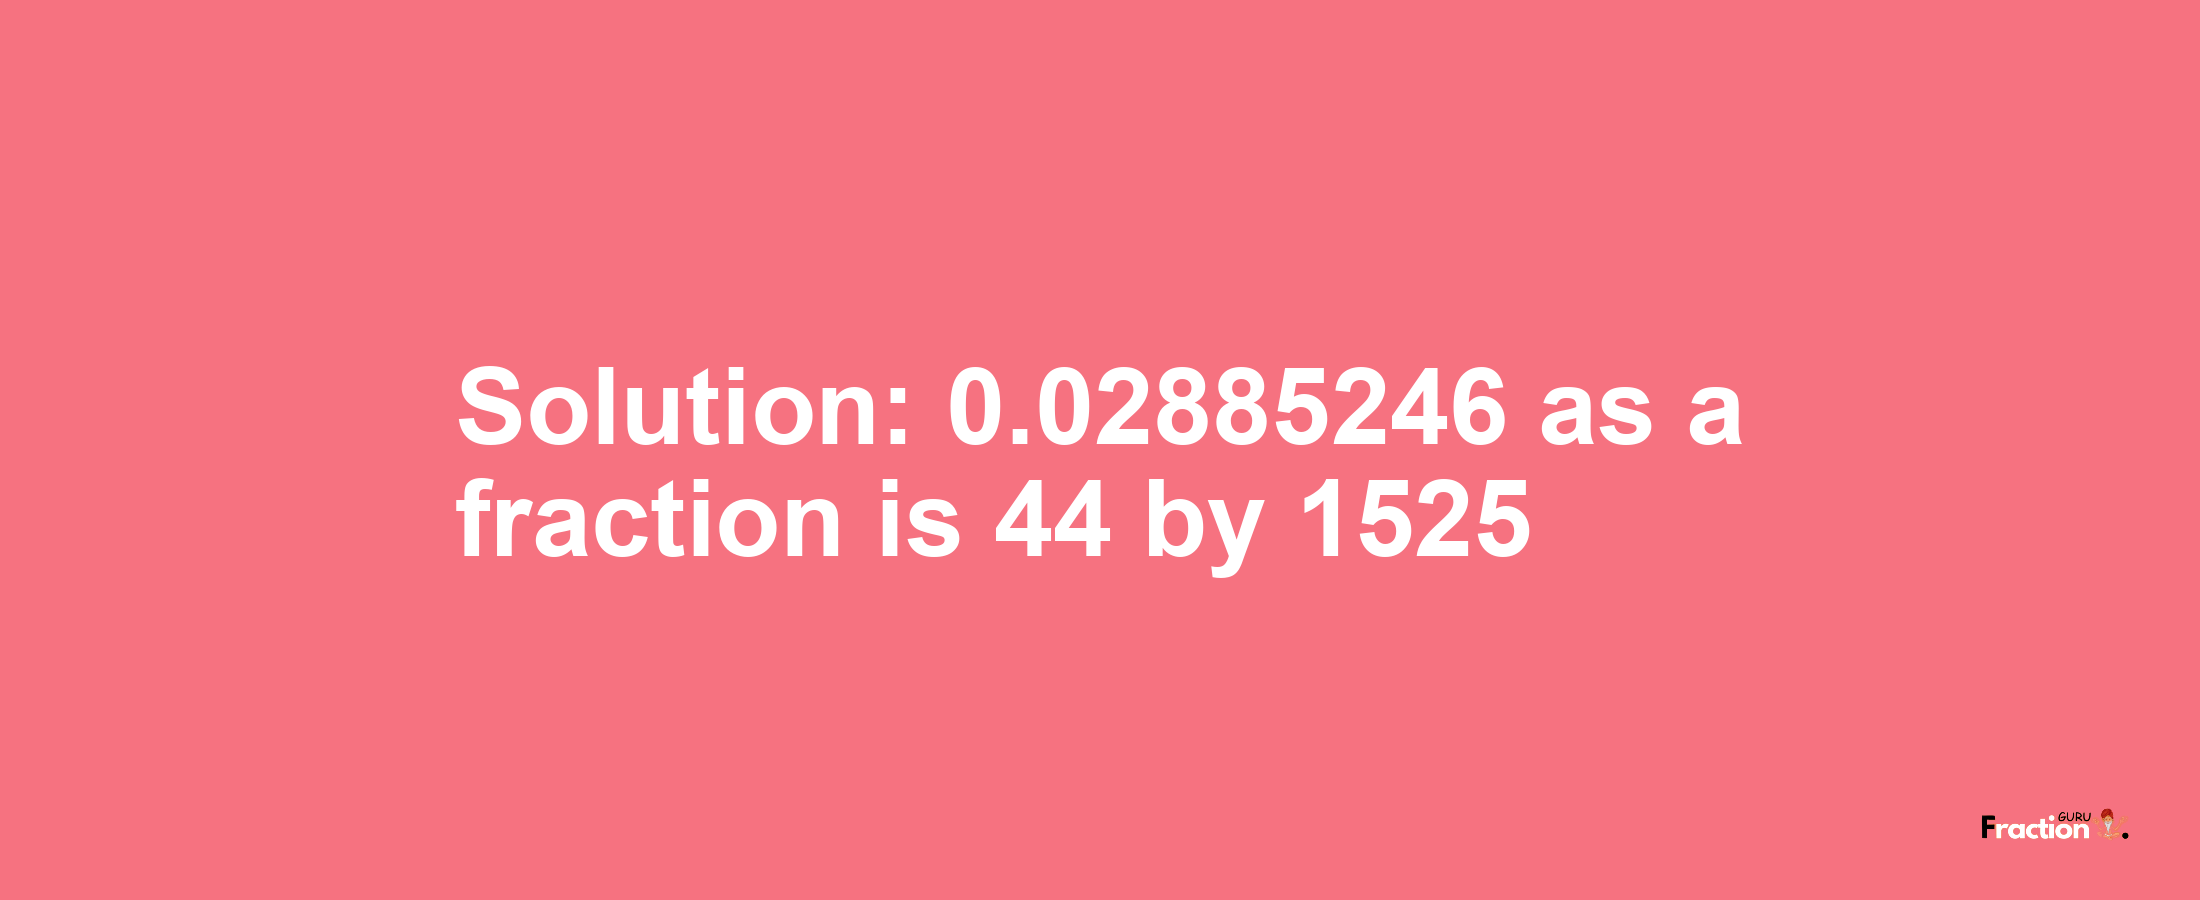 Solution:0.02885246 as a fraction is 44/1525